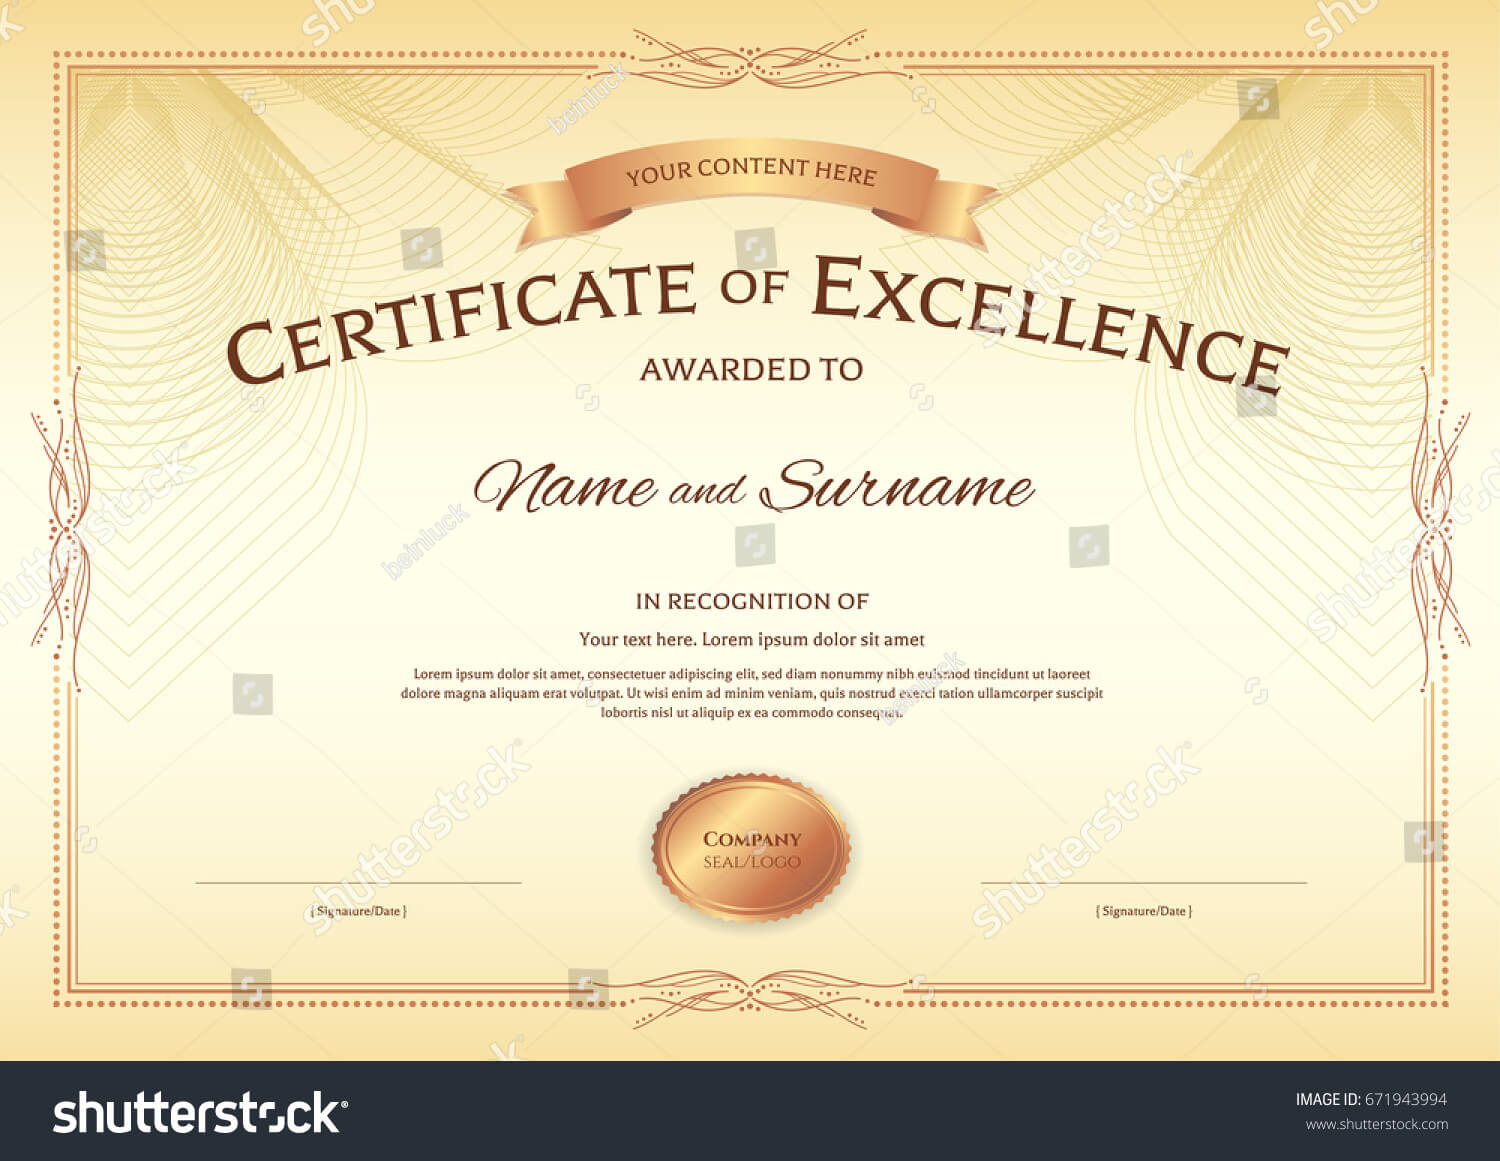 Certificate Excellence Template Award Ribbon On Stock Vector Inside Award Of Excellence Certificate Template